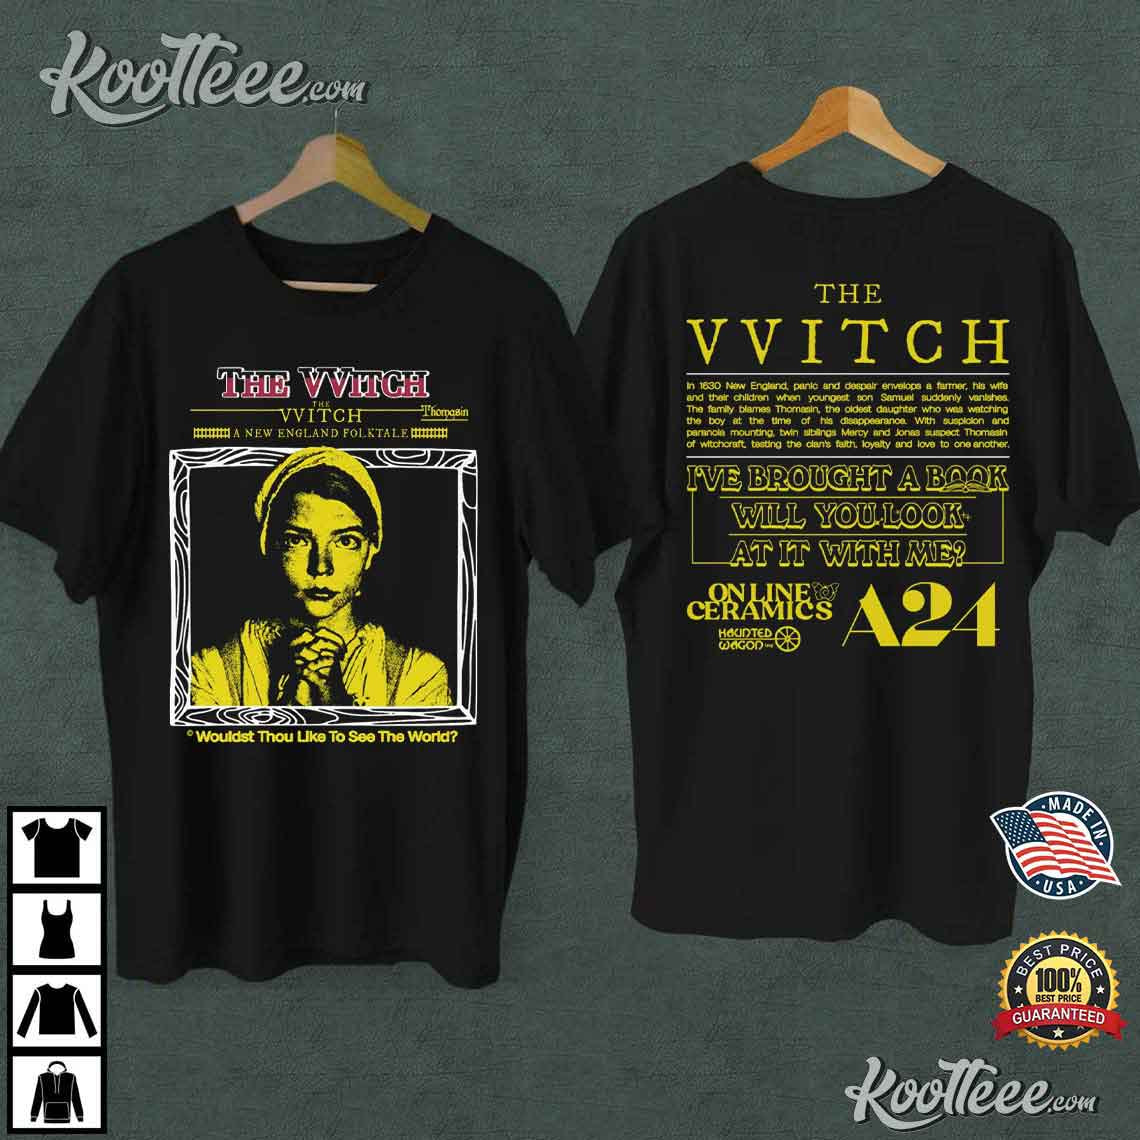 The Witch Online Ceramics And A24 Films T-Shirt